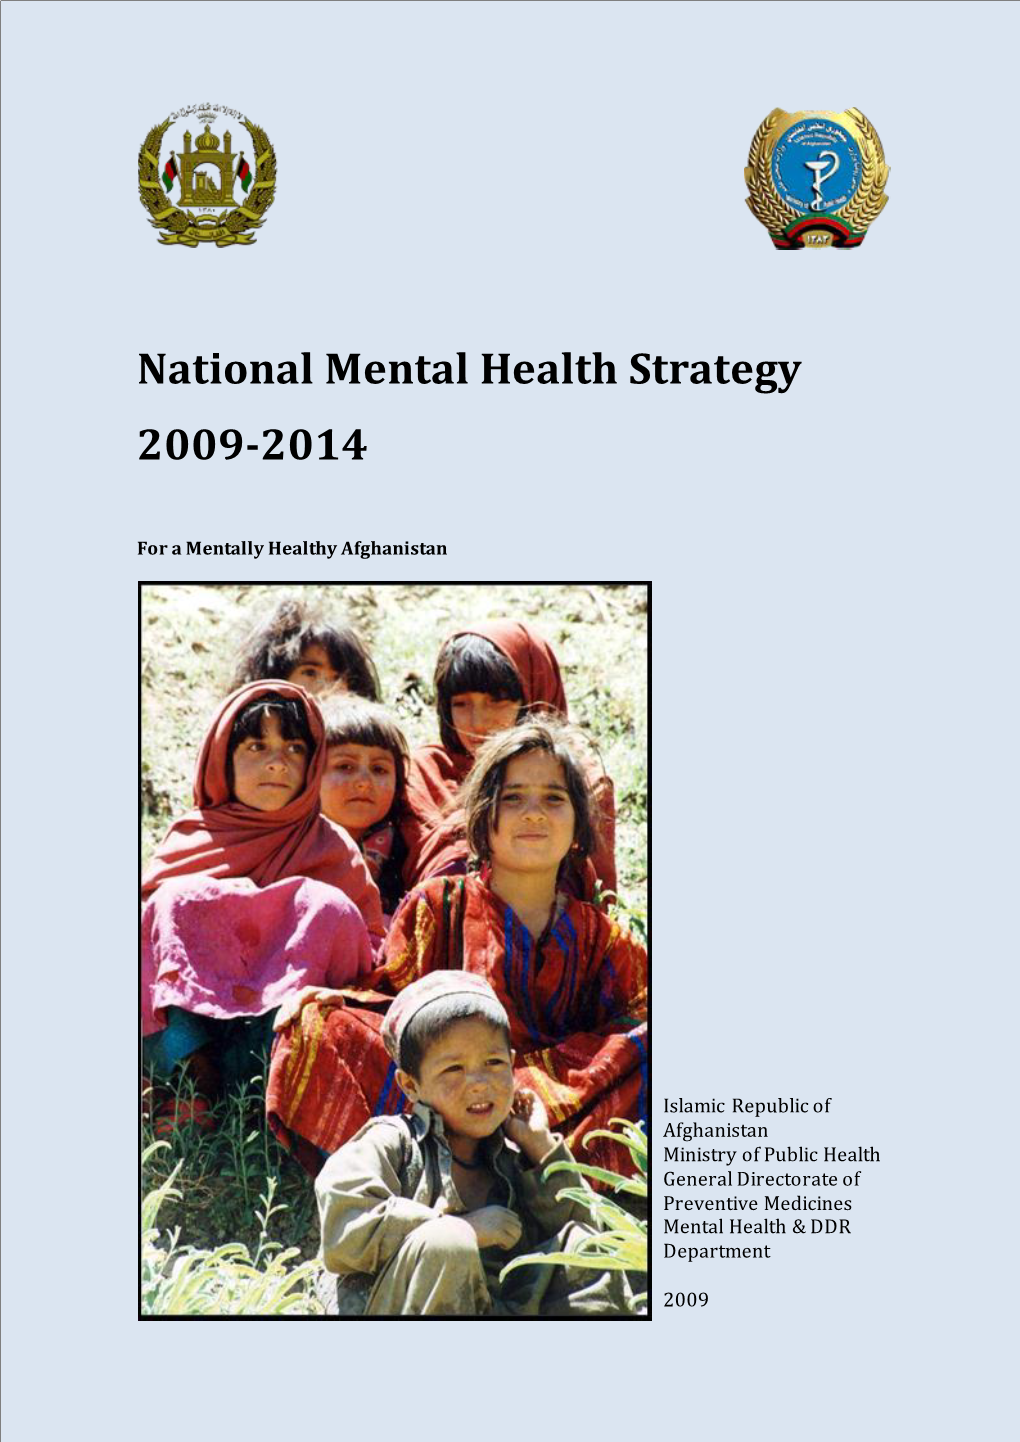 National Mental Health Strategy 2009-2014